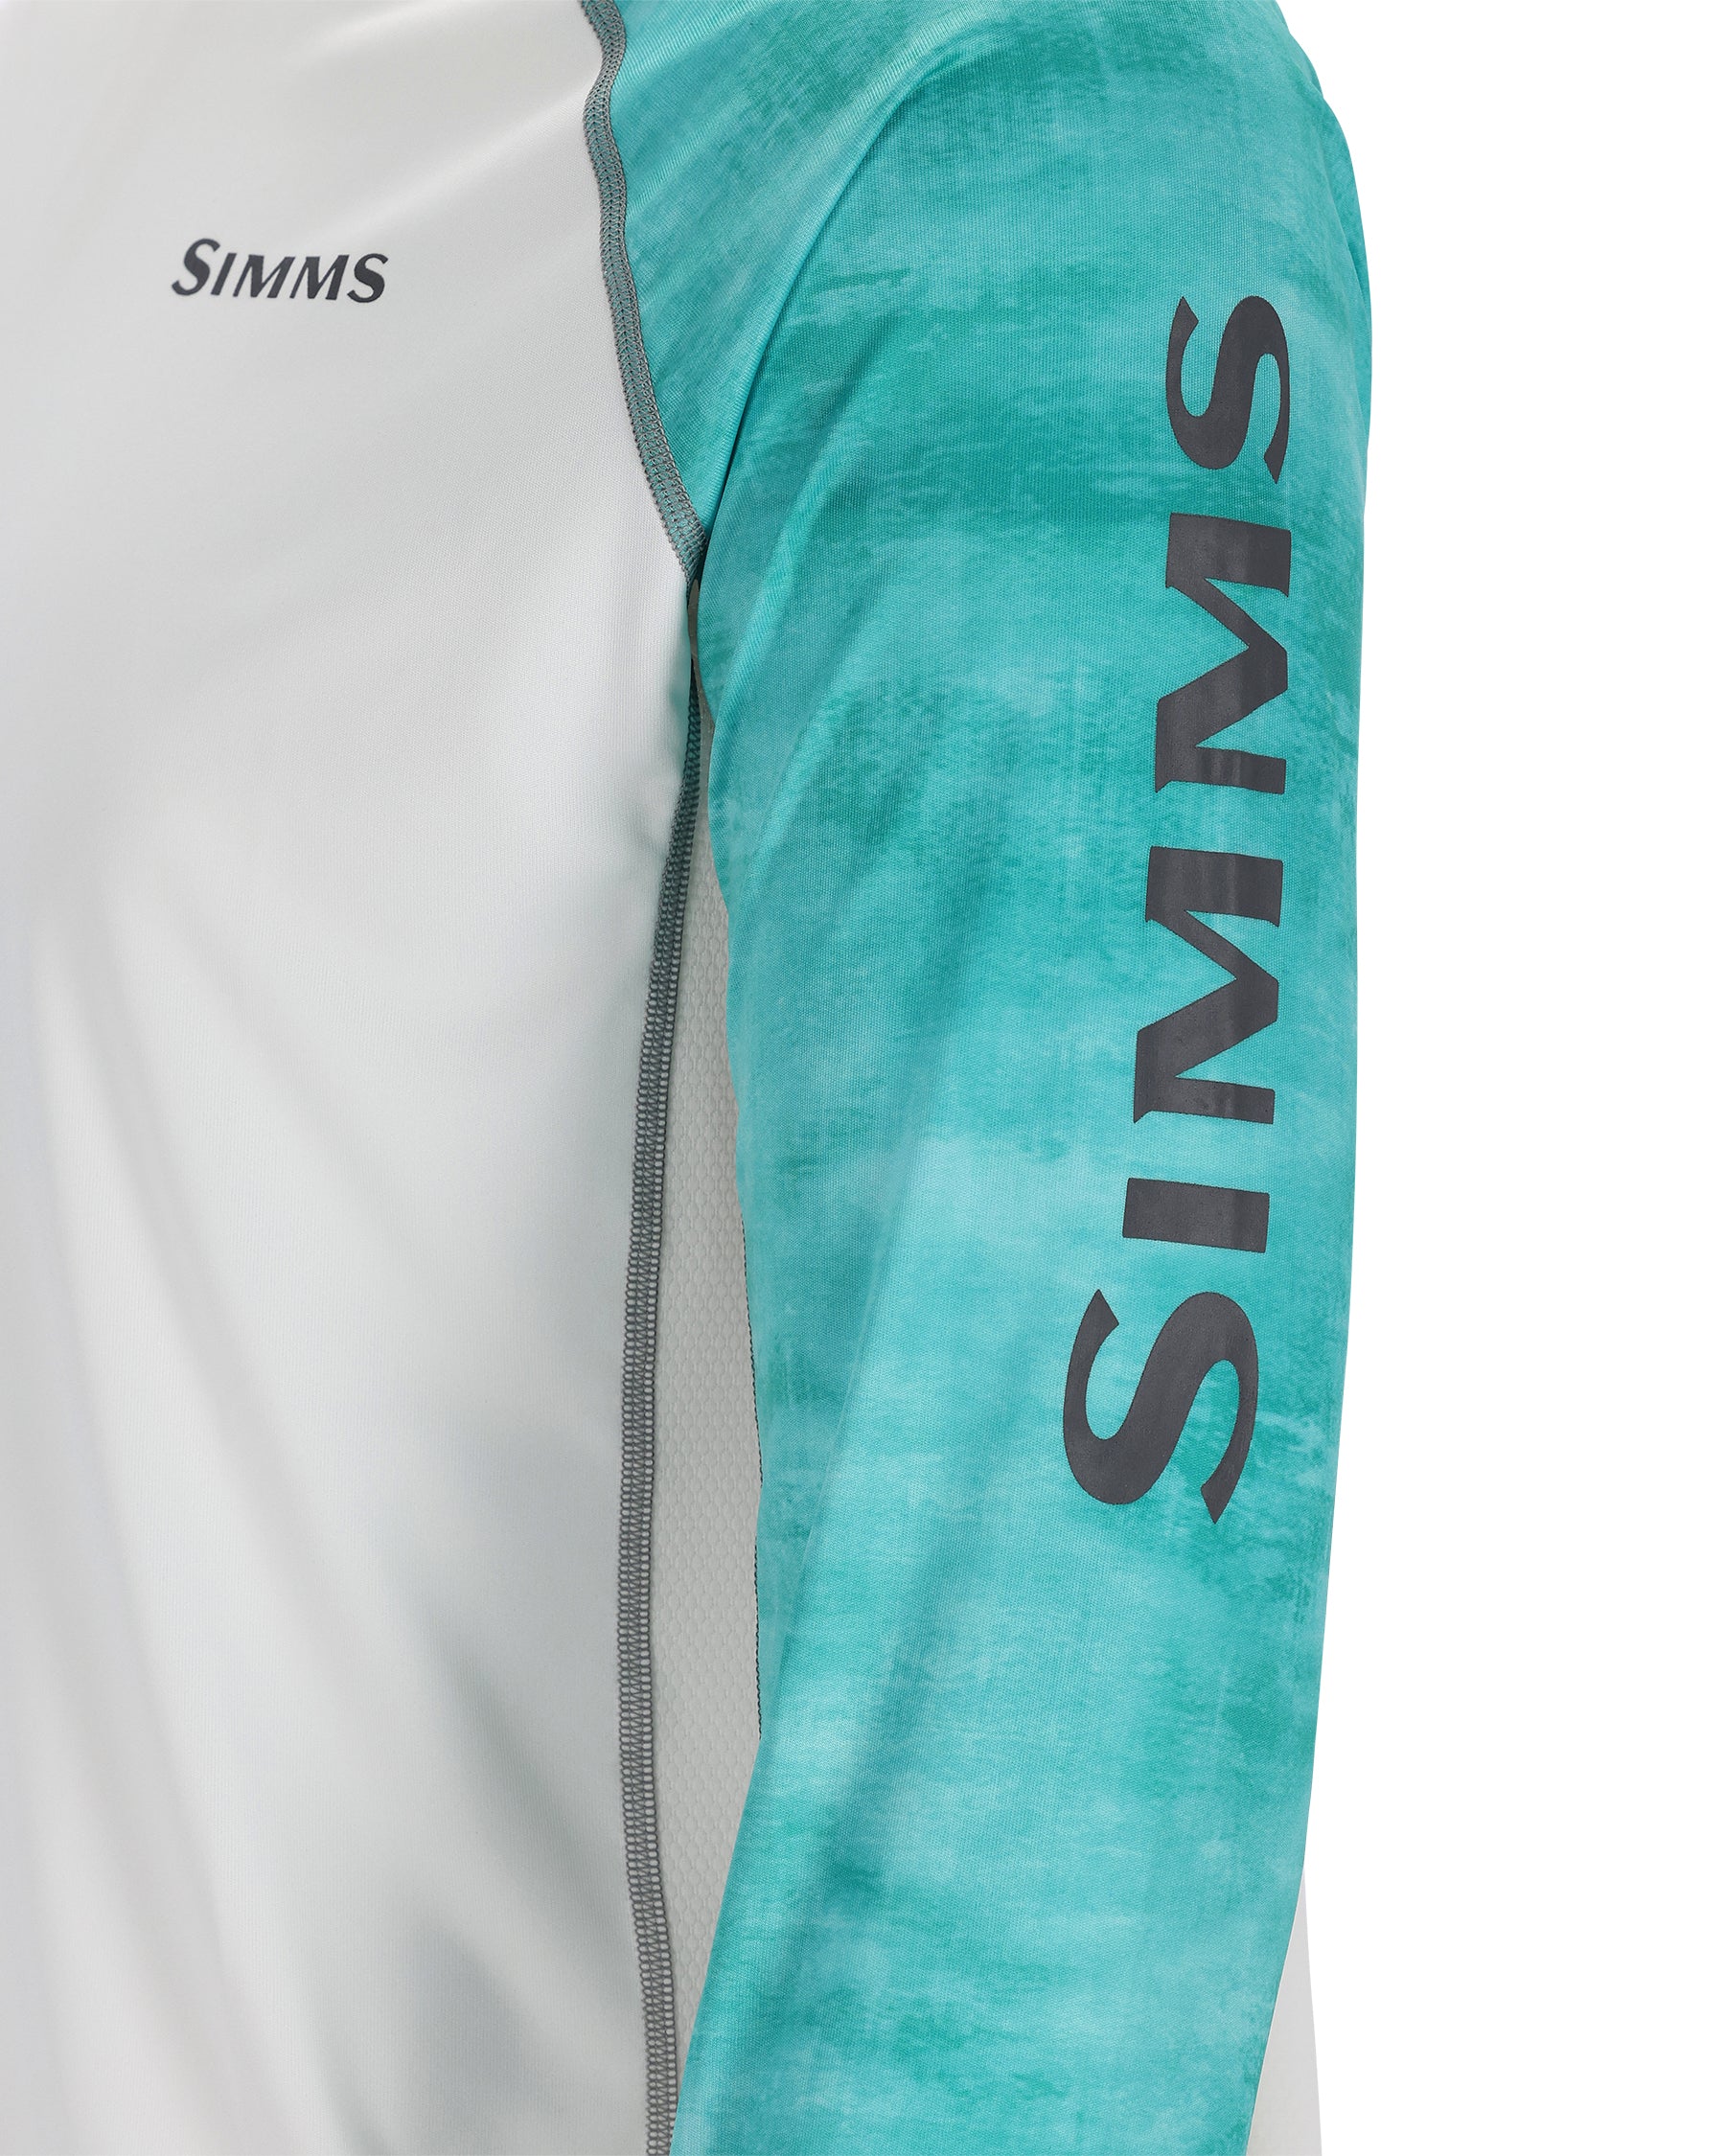 M's Simms Challenger Solar Hoody | Simms Fishing Products